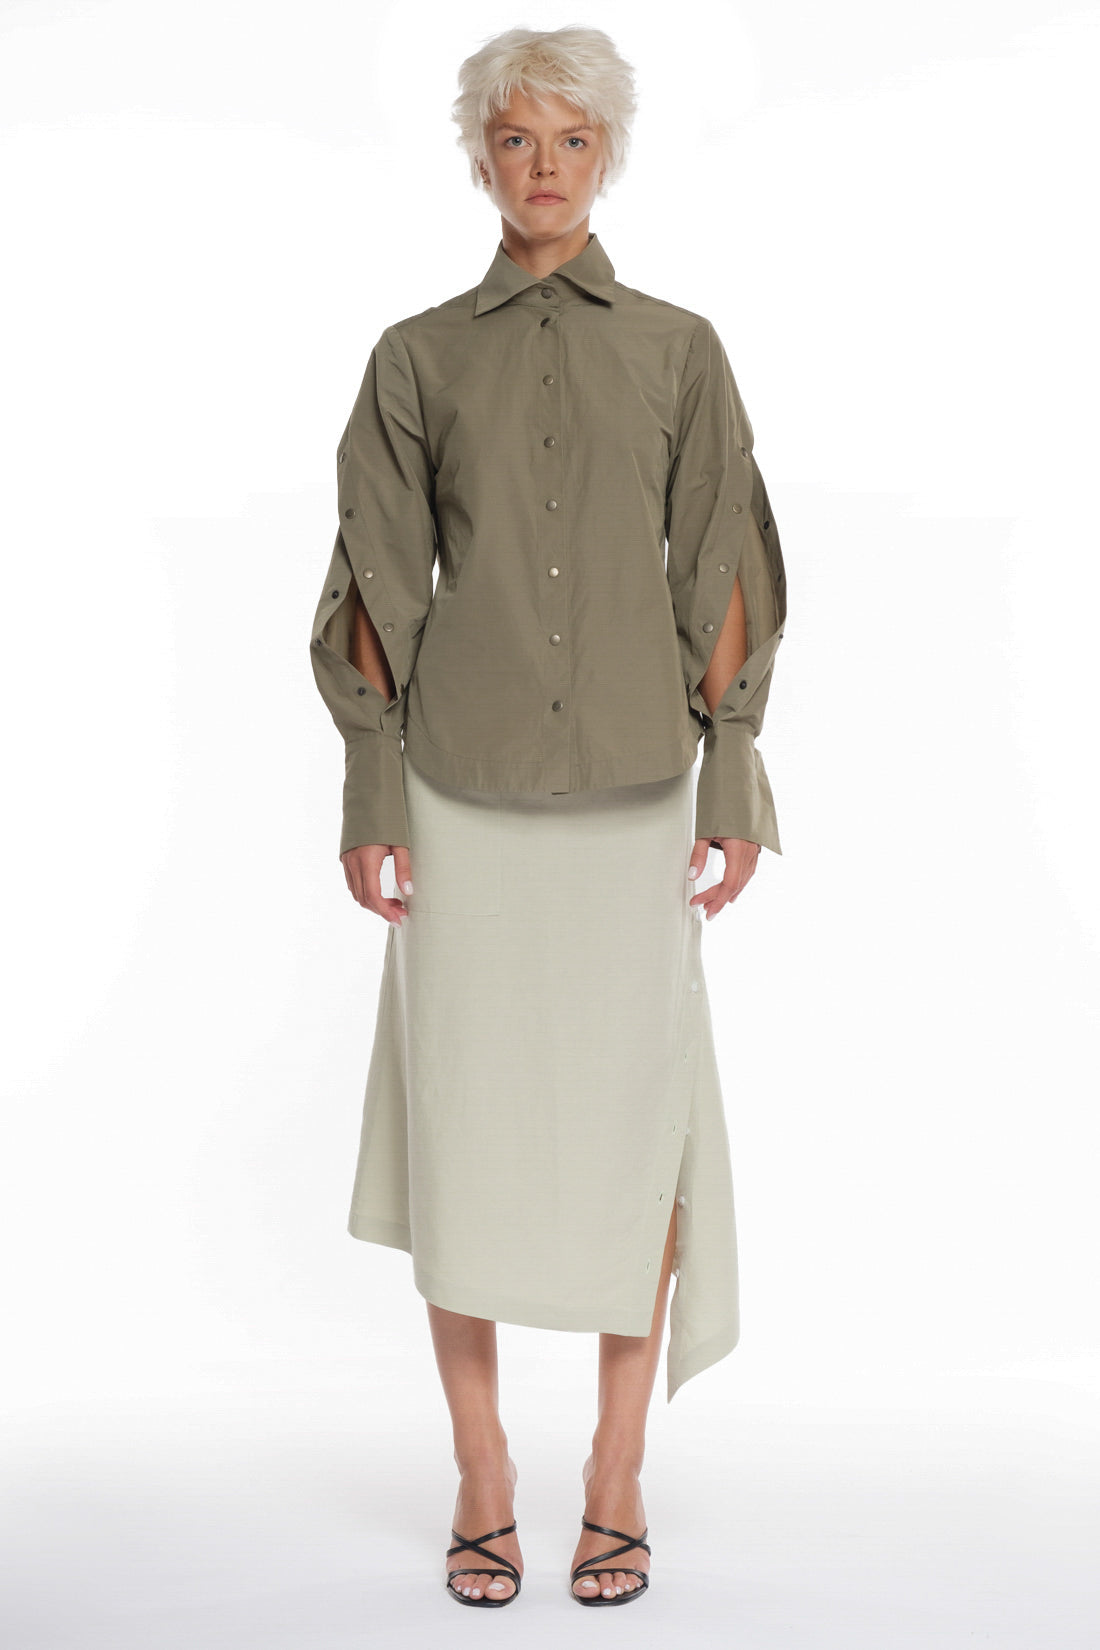 RAIN PROOF SHIRT WITH OPEN SLEEVES, CUTTING AND BUTTONING ON EACH OF THEM, OPEN COLLAR, OVERLAPPING IN FRONT 